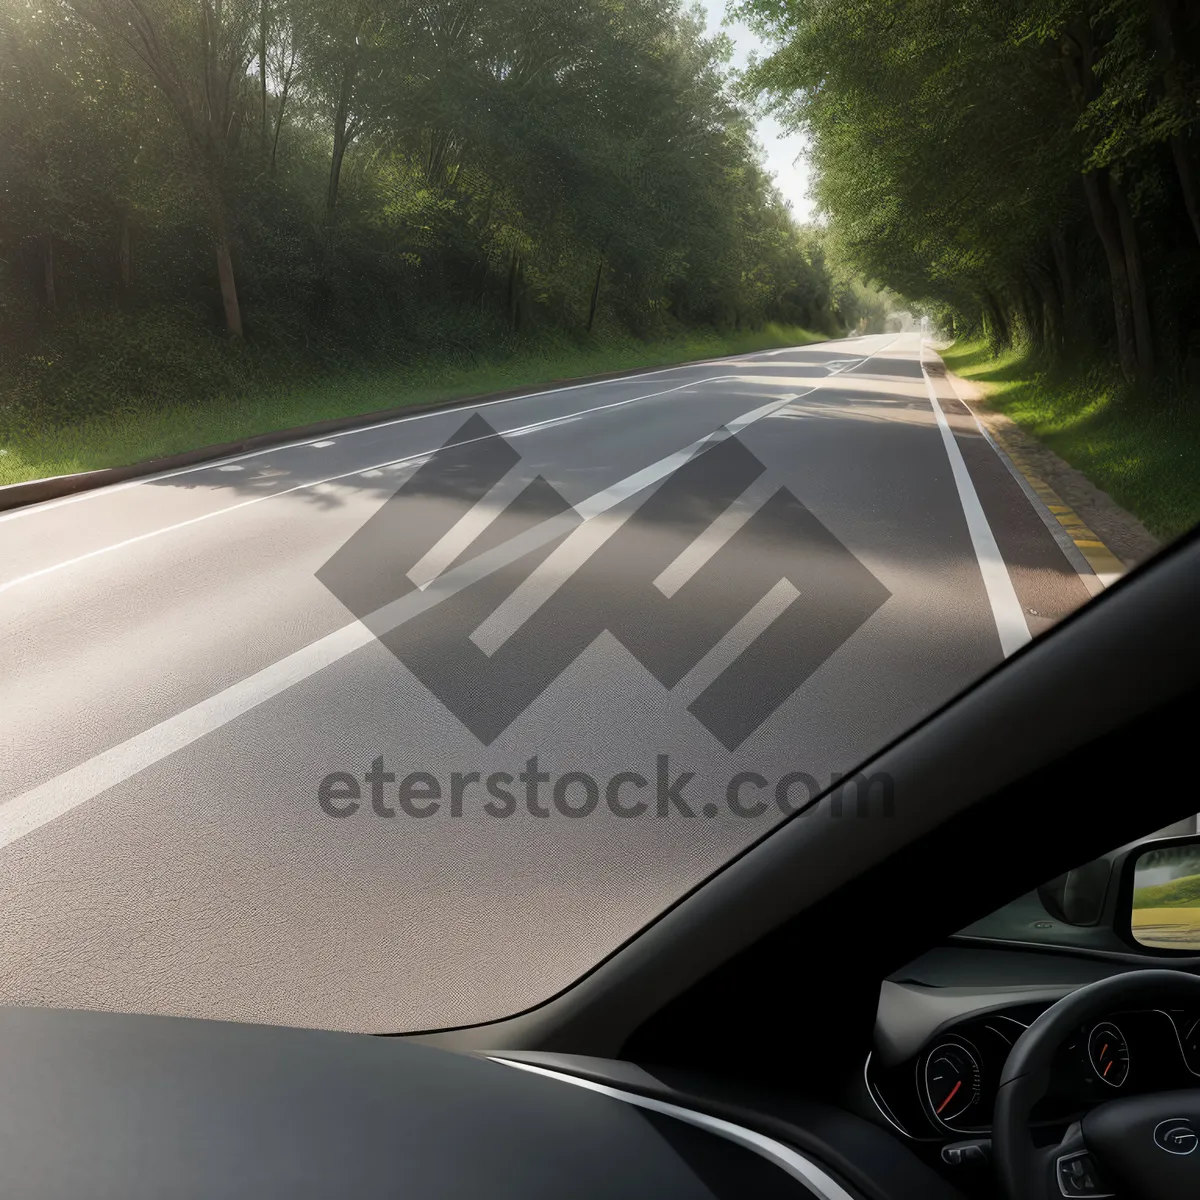 Picture of Speeding Car on Open Highway